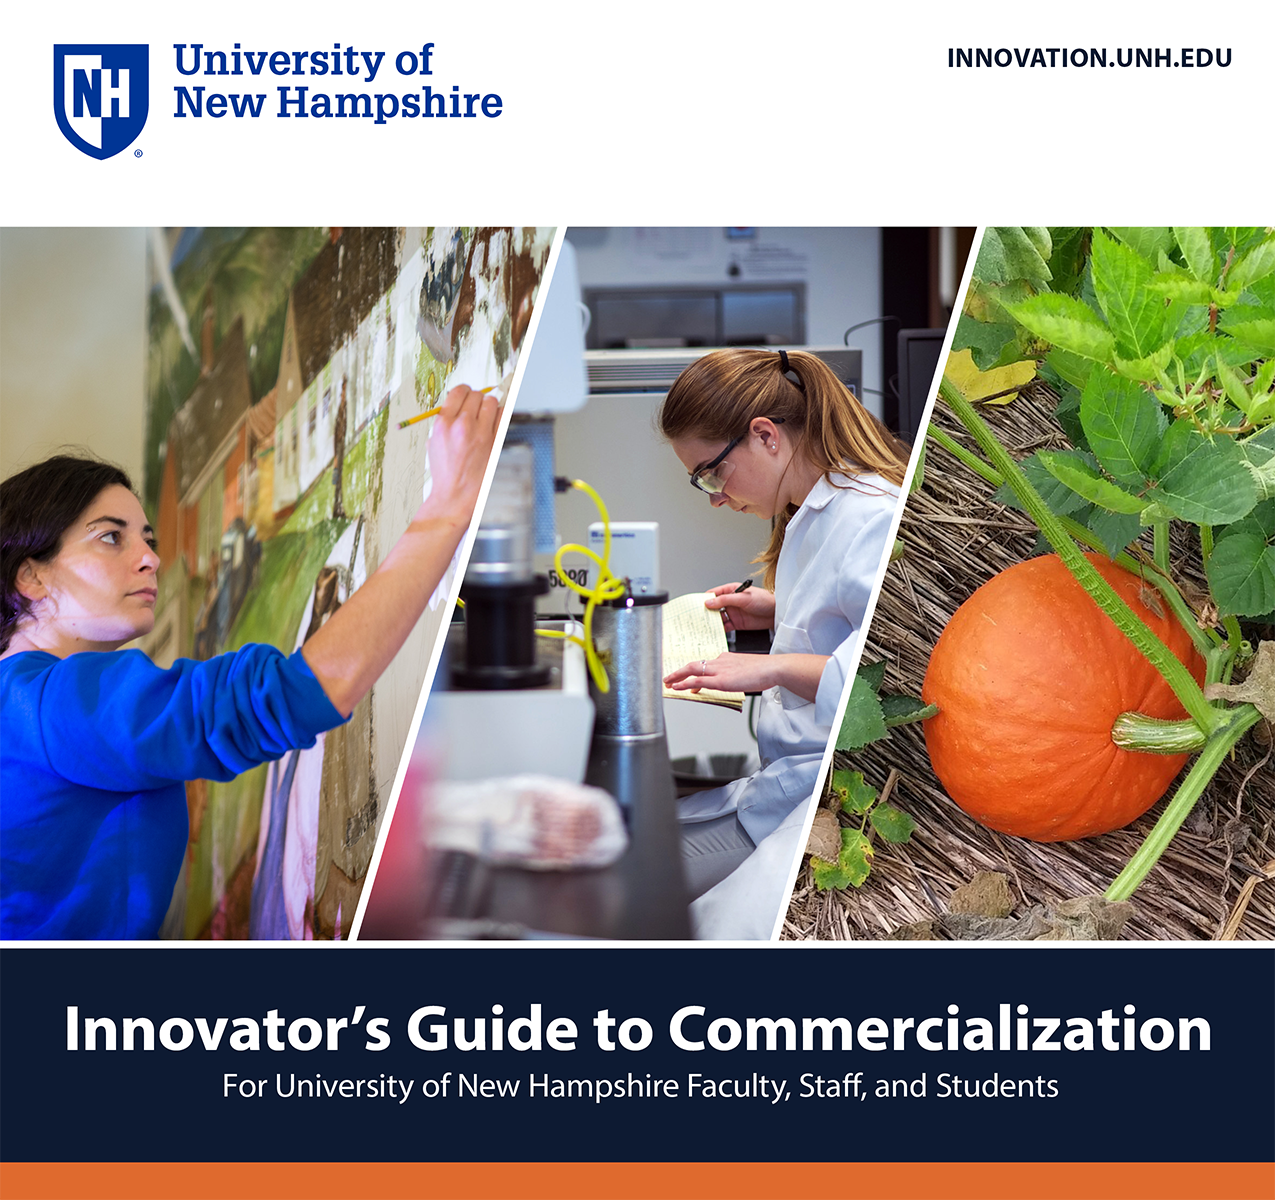 Innovator's guide to commercialization